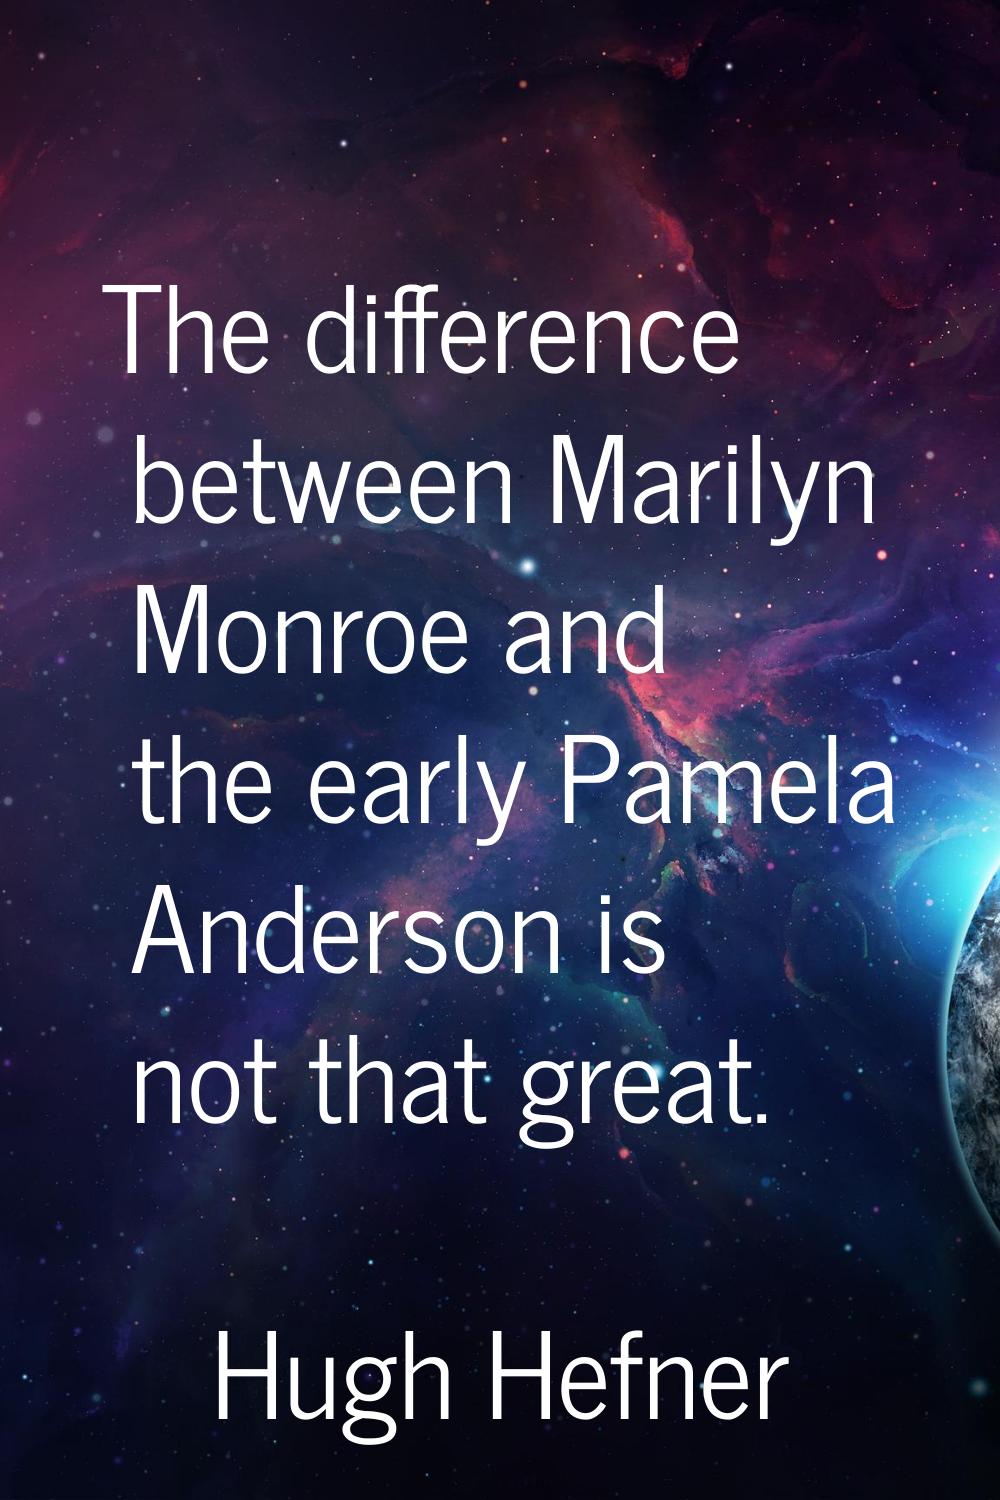 The difference between Marilyn Monroe and the early Pamela Anderson is not that great.